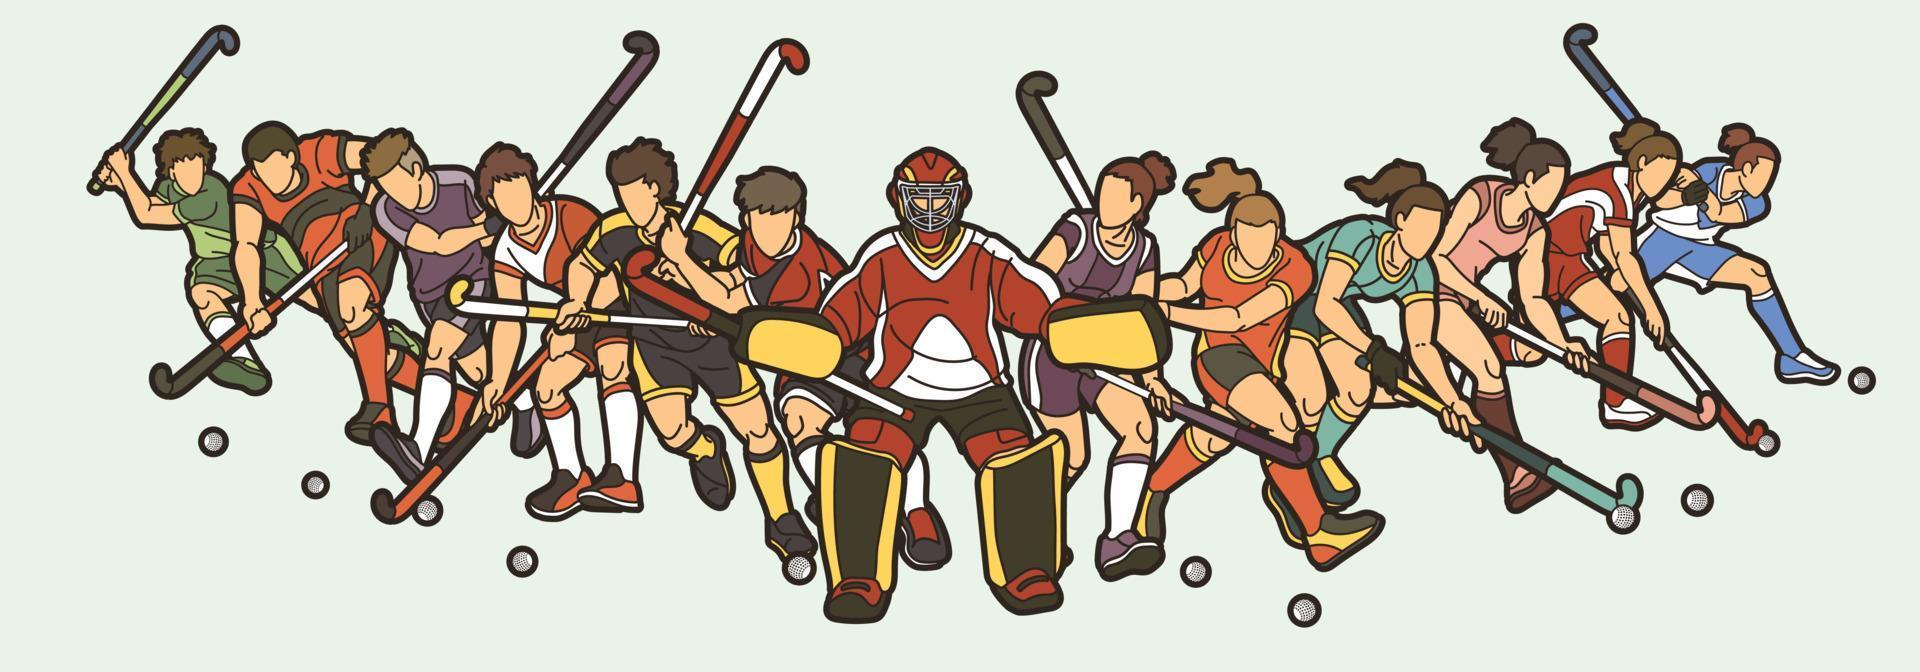 Group of Field Hockey Sport Male and Female Players Action Together Cartoon Graphic Vector